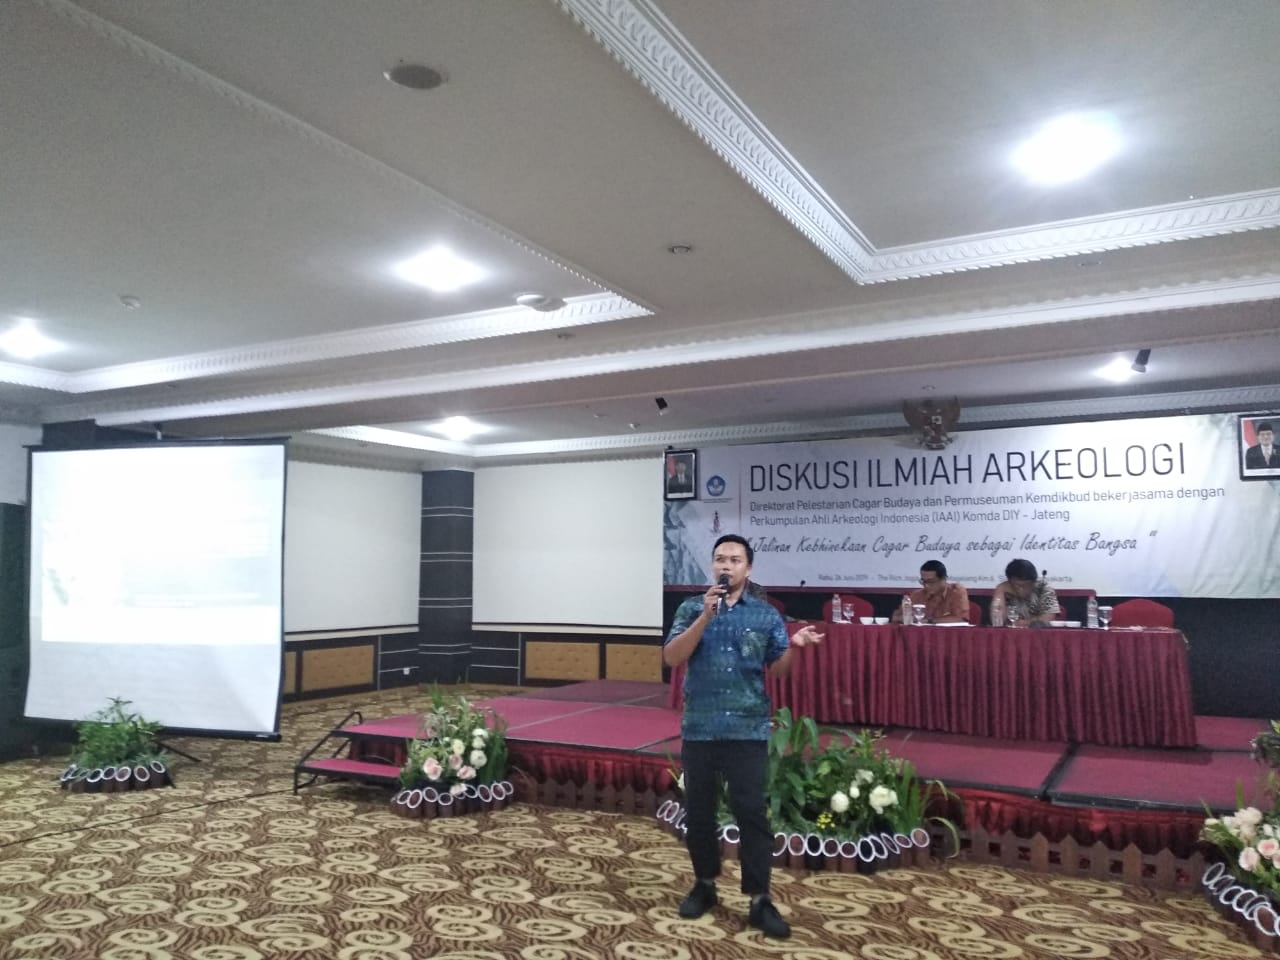 You are currently viewing Diskusi Ilmiah Arkeologi